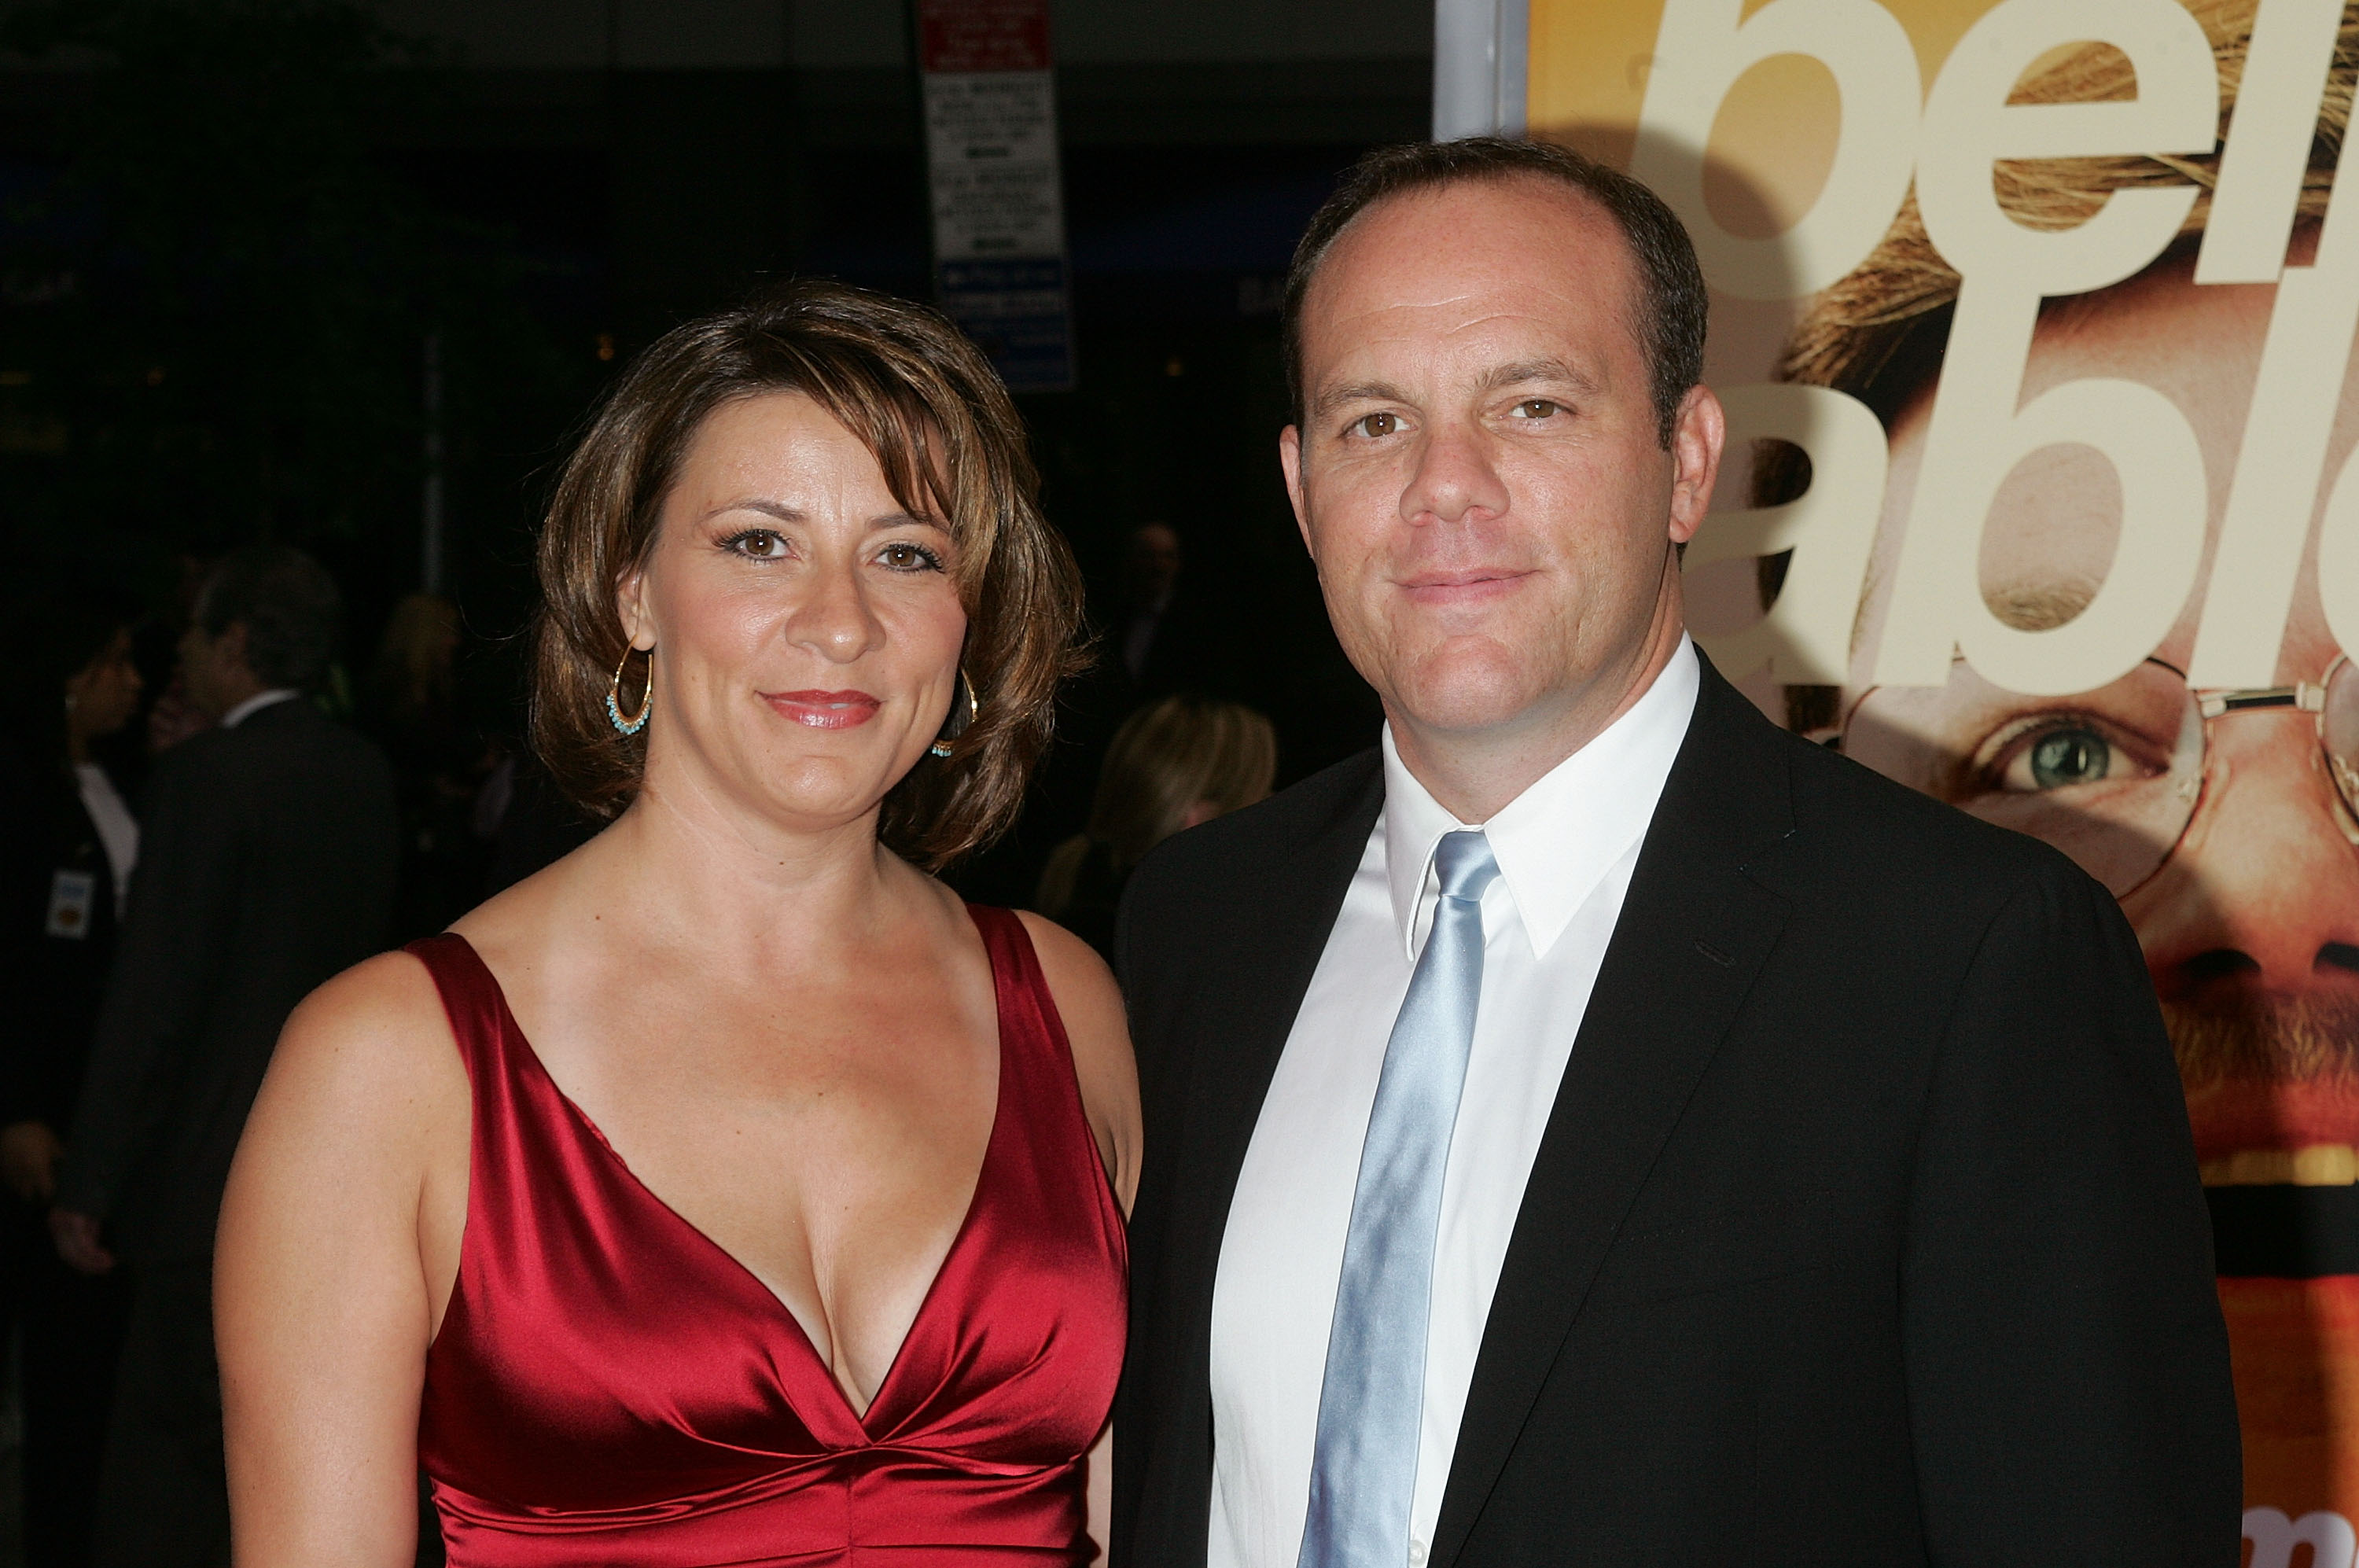 Tom Papa and Cynthia Koury-Papa at the premiere of "The Informant!" in 2009, in New York City. | Source: Getty Images